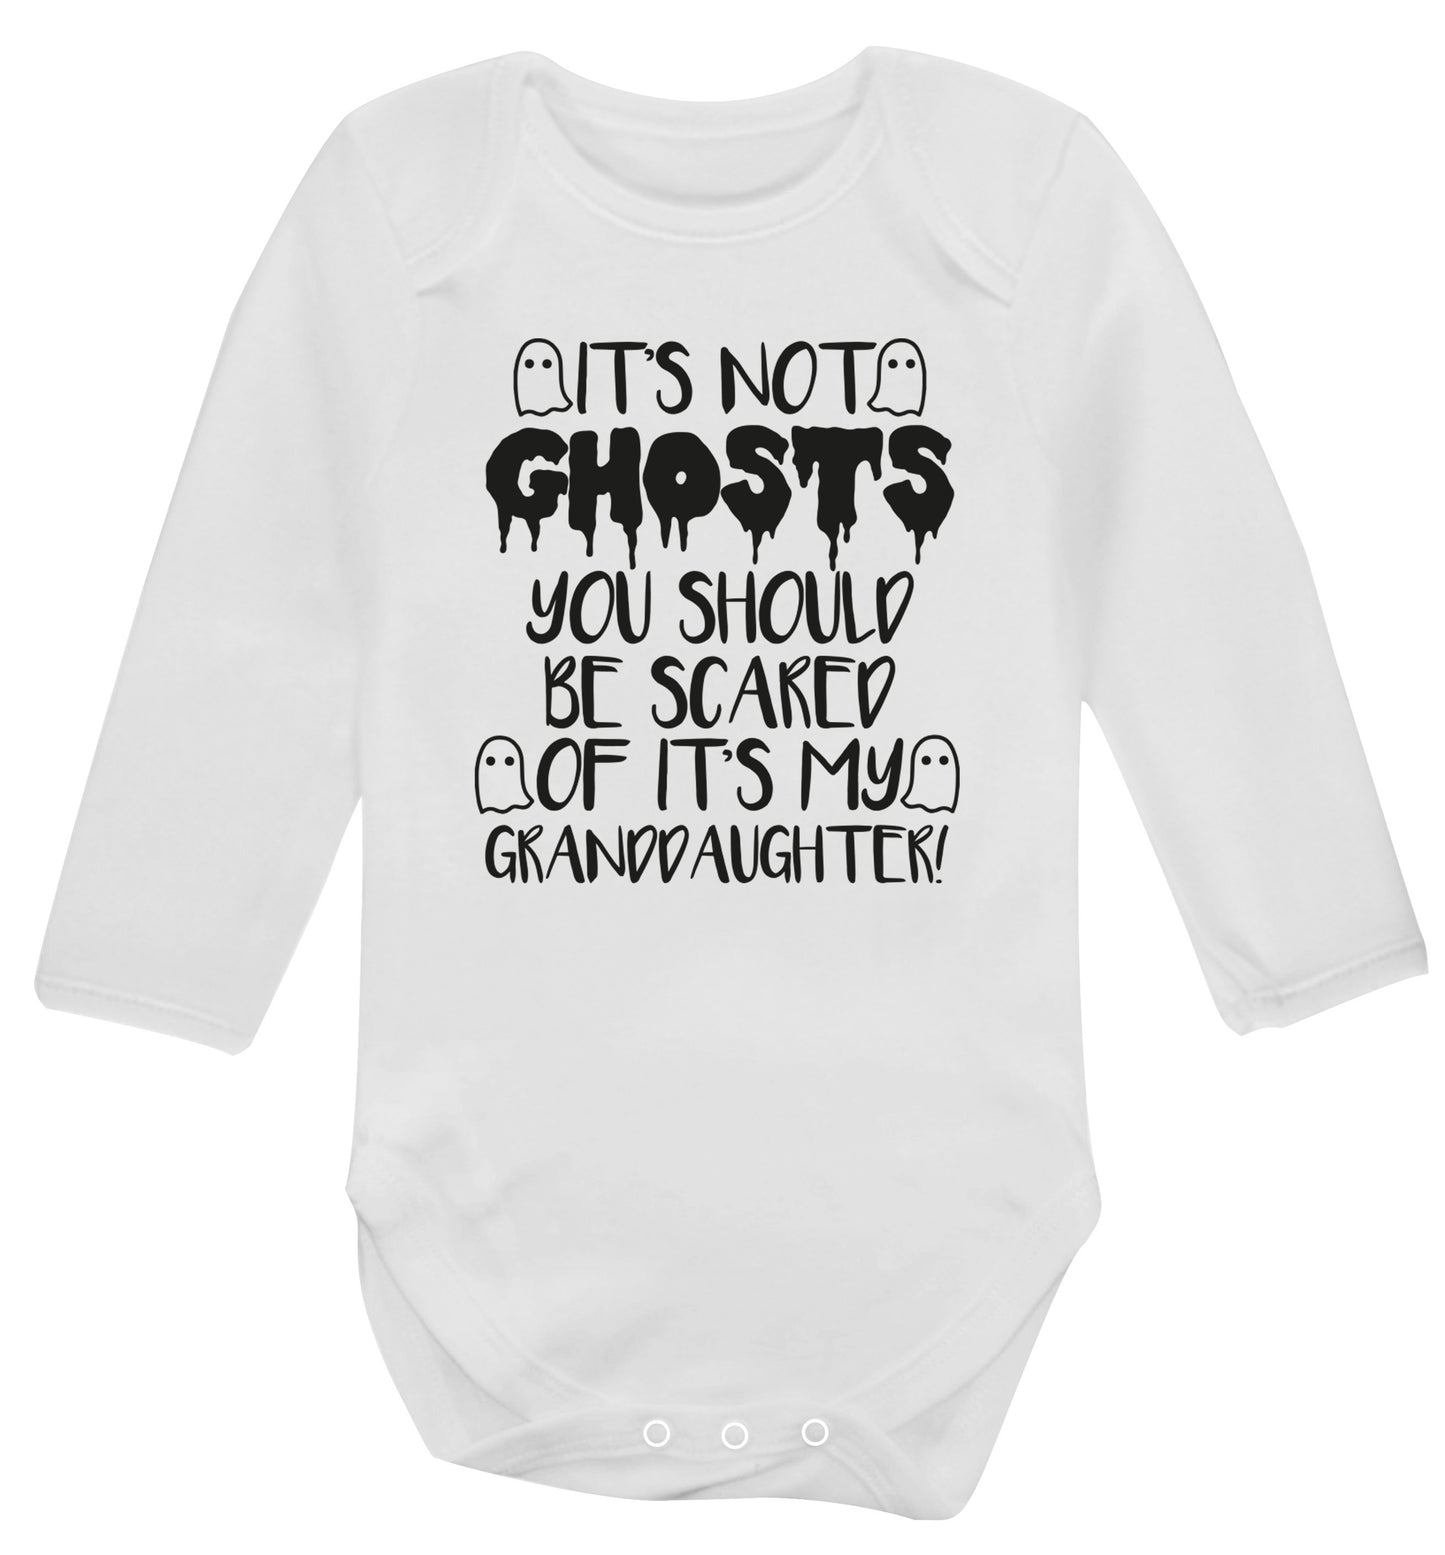 It's not ghosts you should be scared of it's my granddaughter! Baby Vest long sleeved white 6-12 months